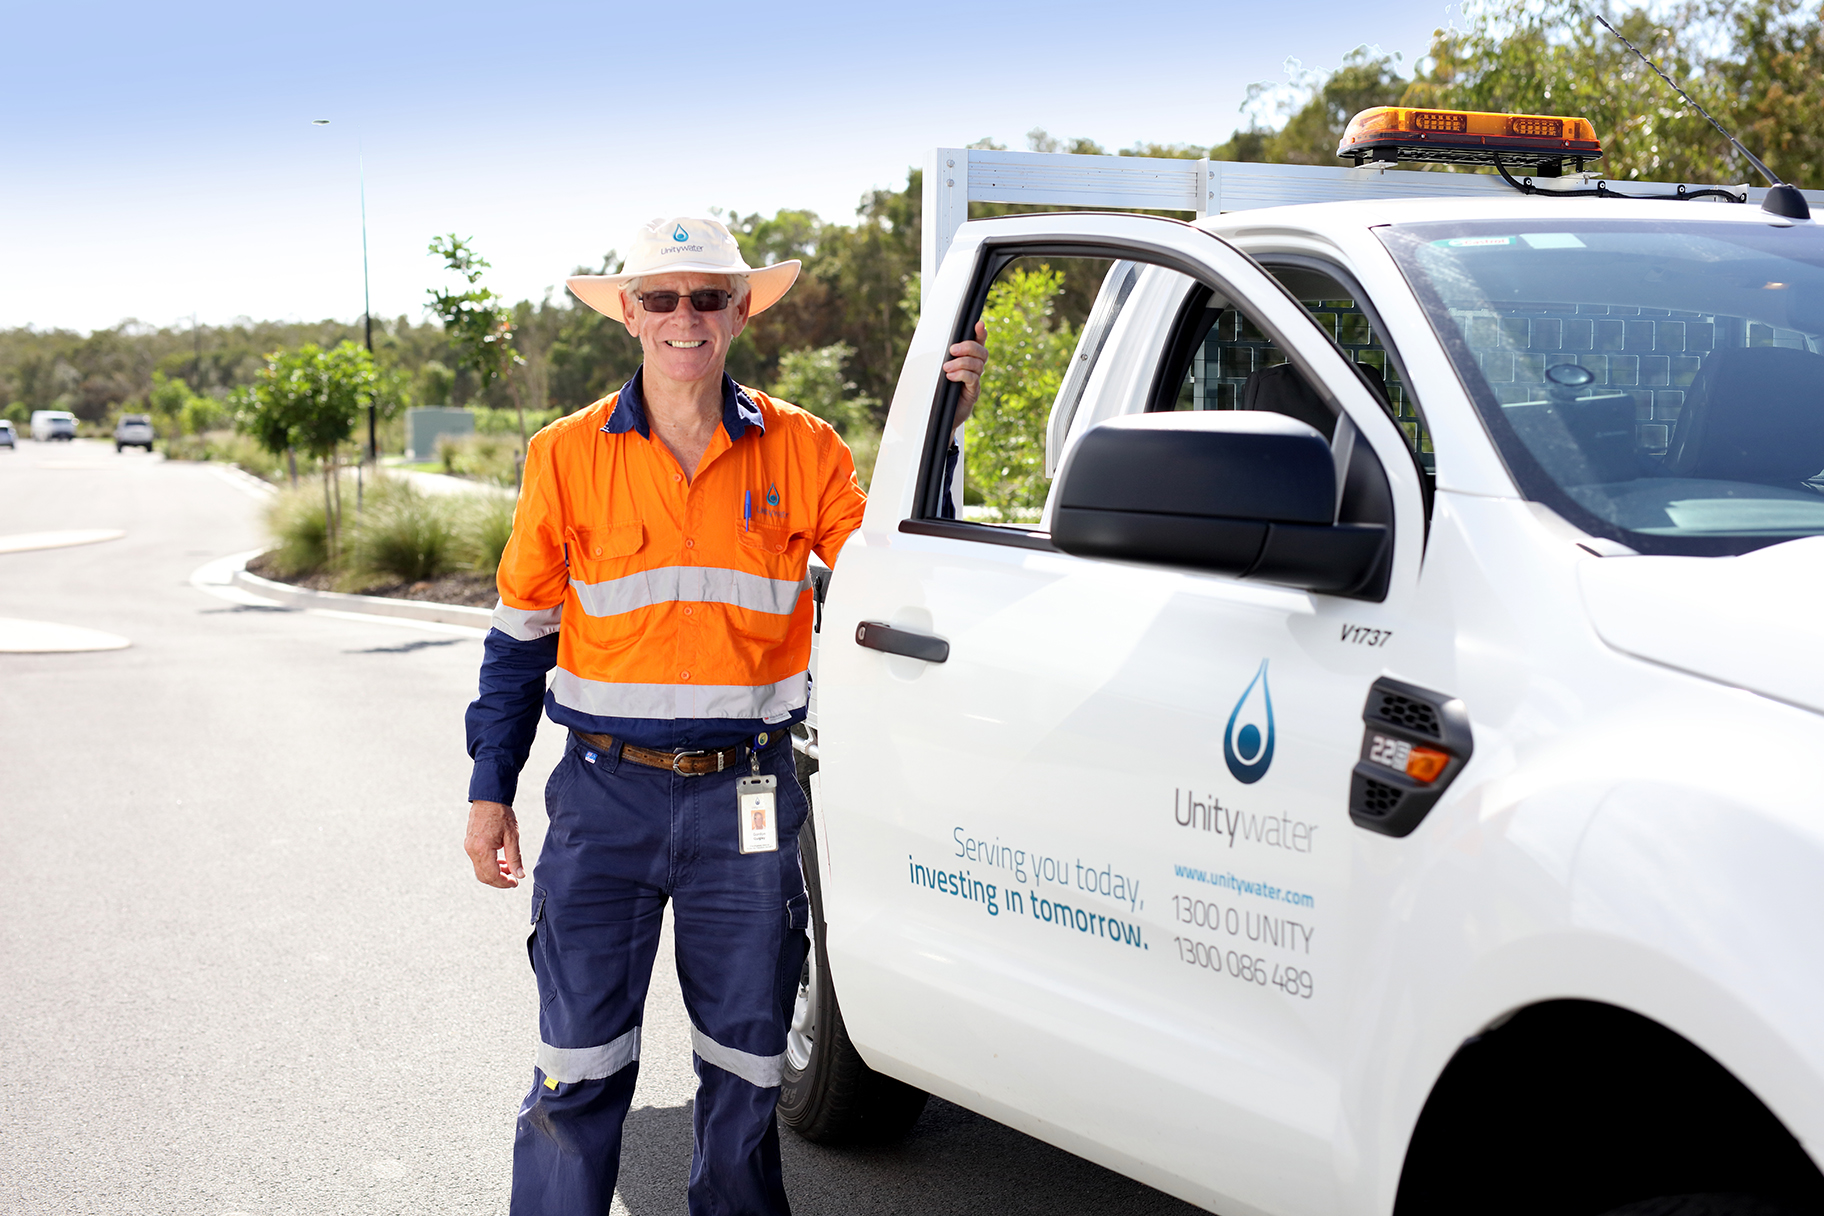 Male Field Crew staff member standing next to Unitywater utility vehicle